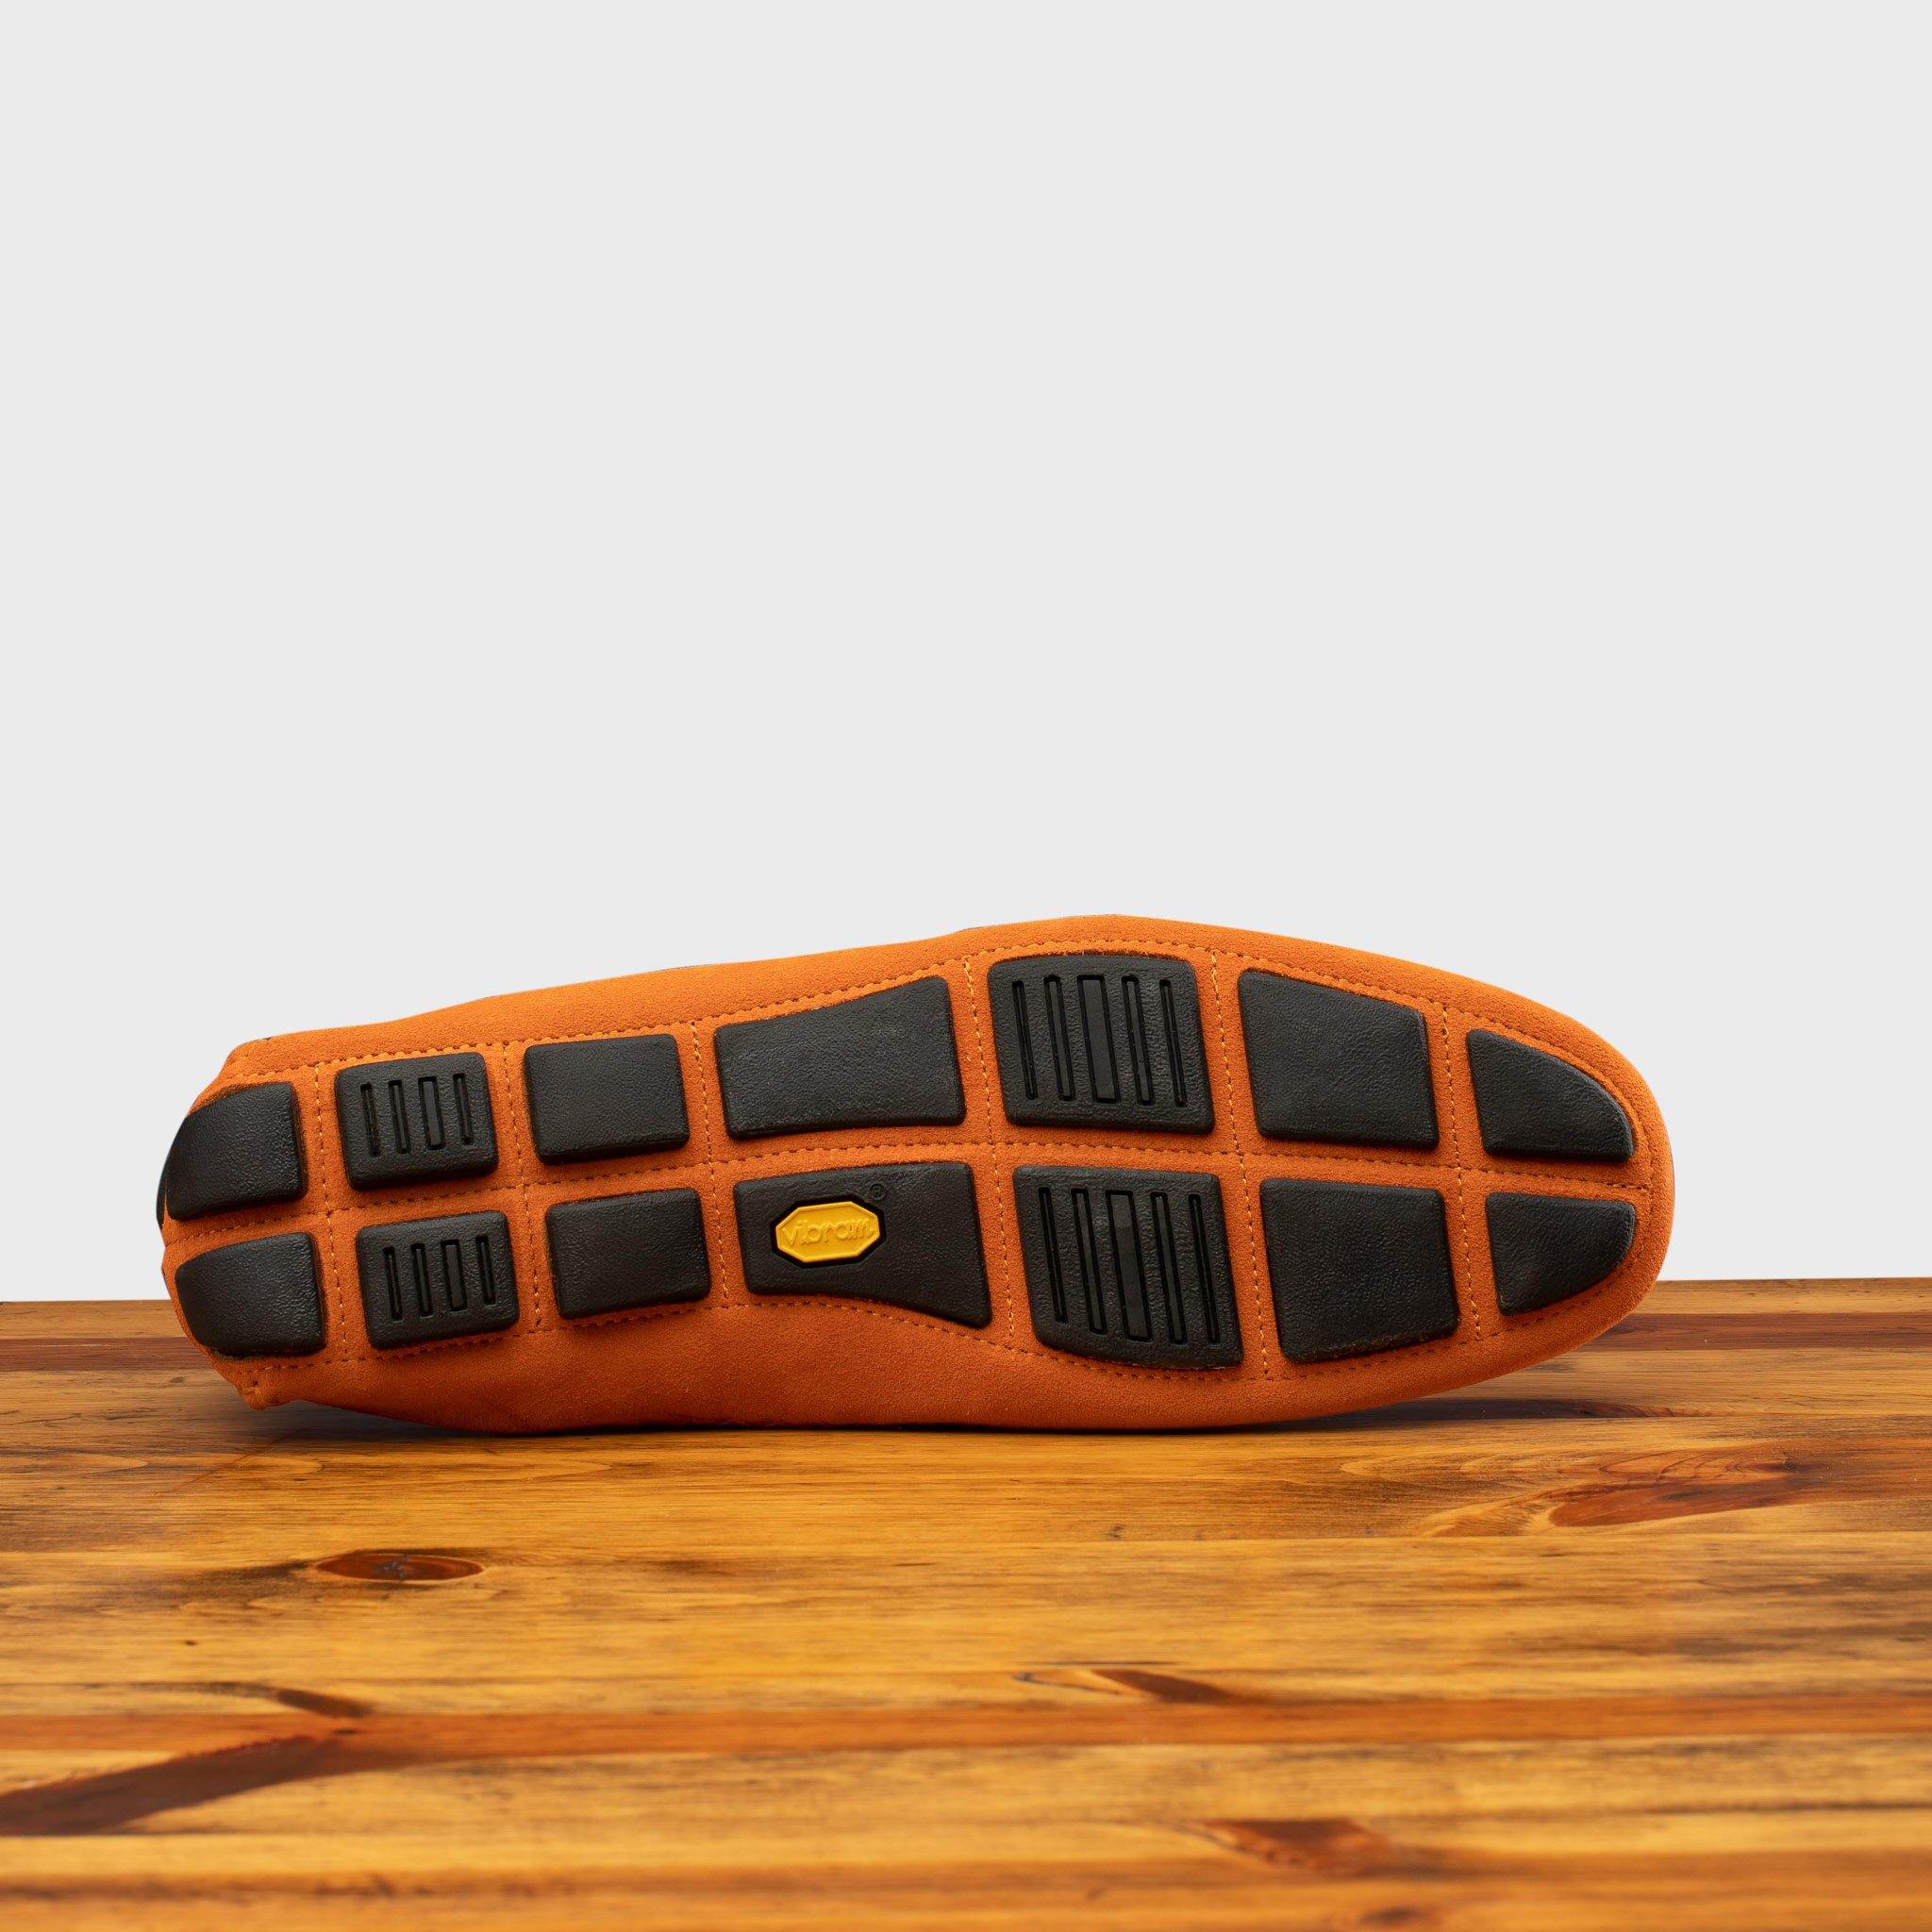 Full Rubber Vibram Outsole of 5303 Calzoleria Toscana Papaya Venetian Suede Driver on top of a wooden table